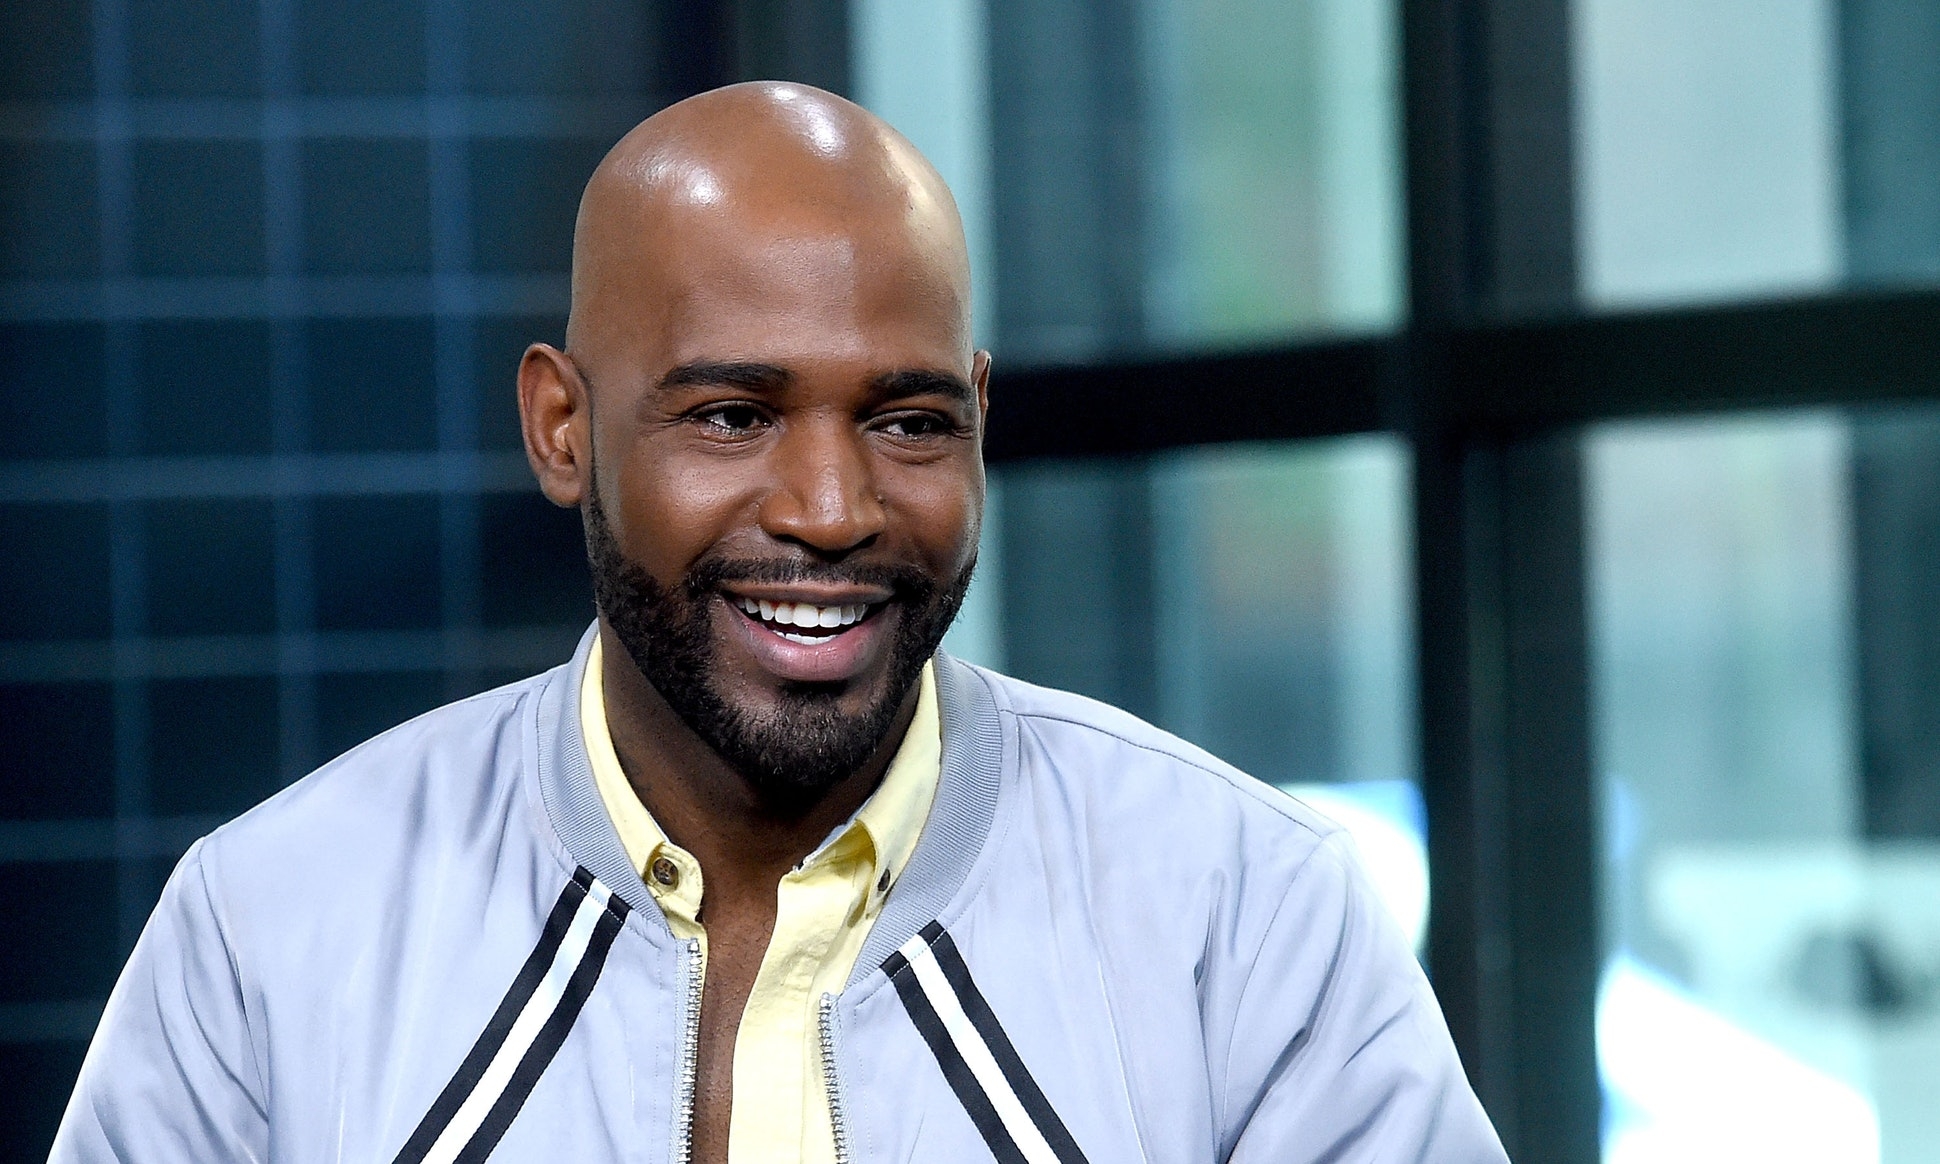 Karamo Brown From ‘Queer Eye’ Has Another Dream Job In Mind Aside From His Successful TV Career